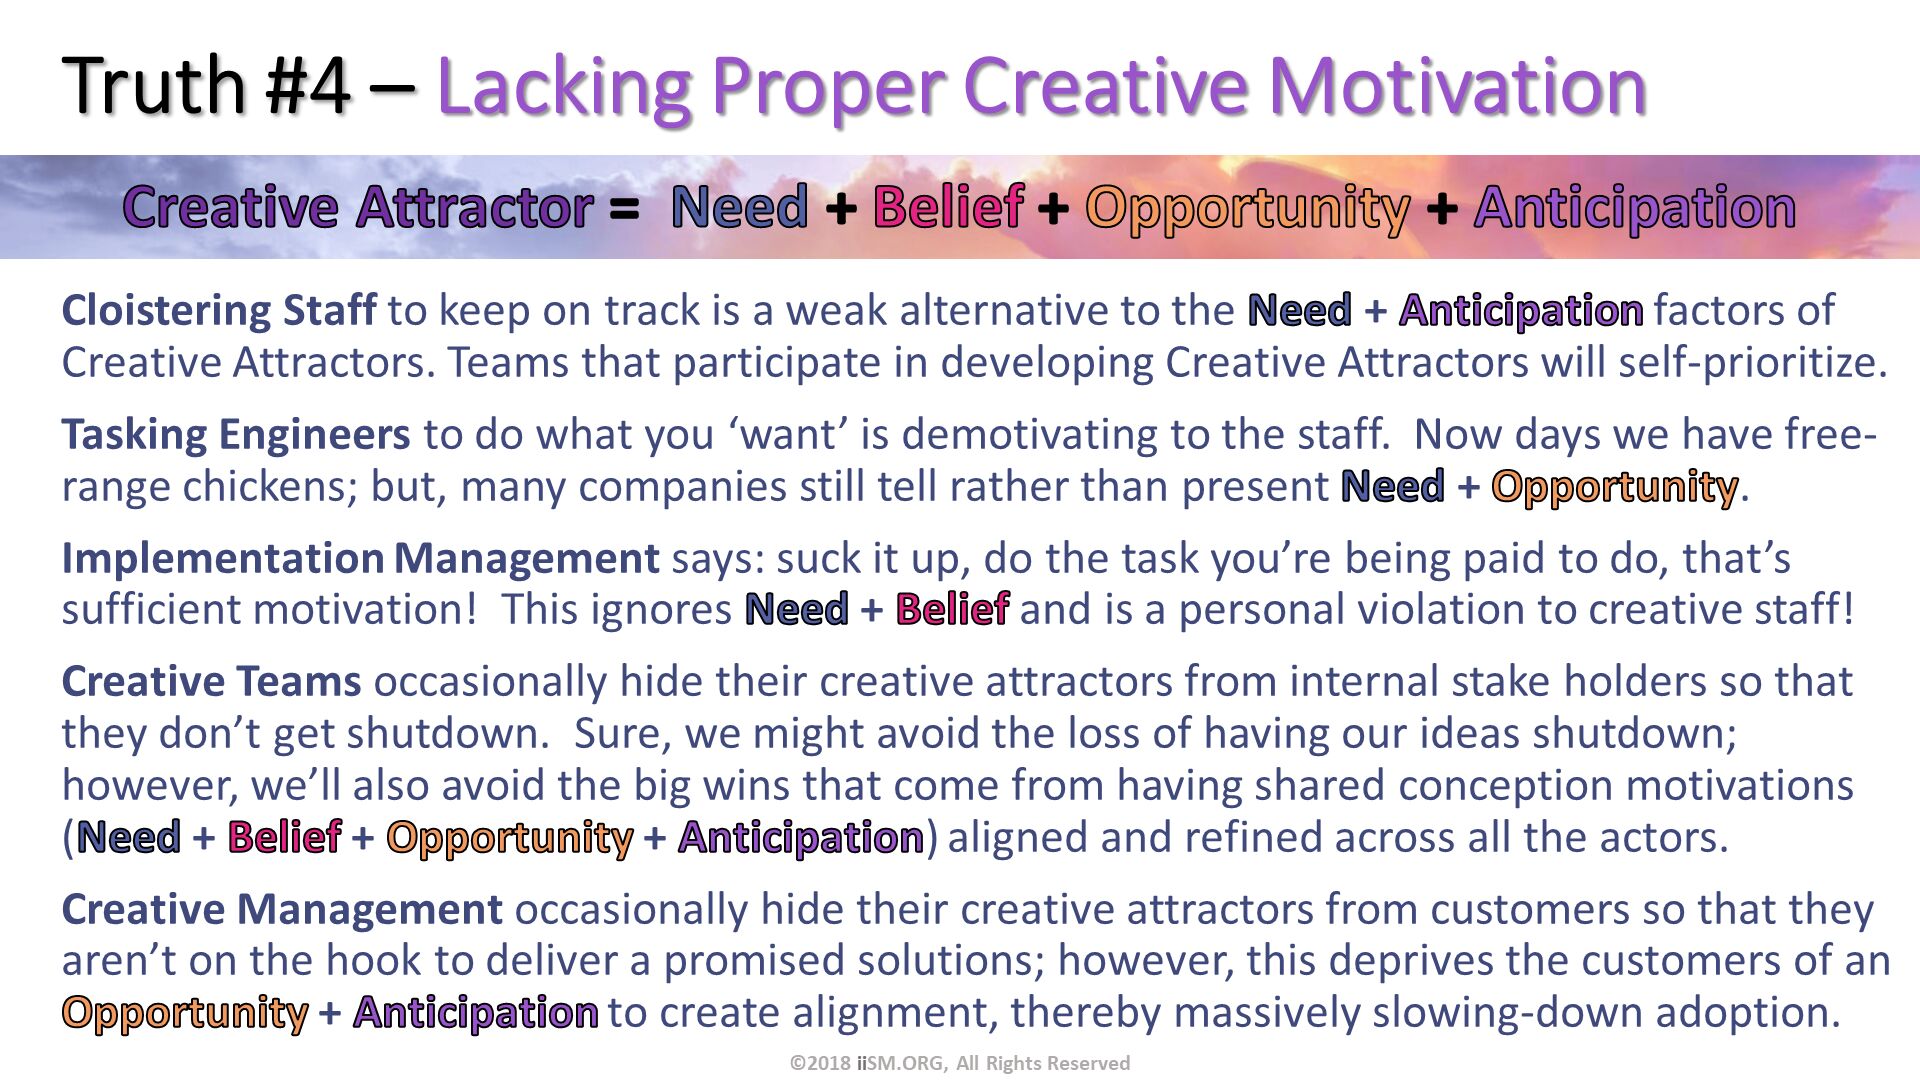 Truth #4 – Lacking Proper Creative Motivation. Cloistering Staff to keep on track is a weak alternative to the Need + Anticipation factors of Creative Attractors. Teams that participate in developing Creative Attractors will self-prioritize.
Tasking Engineers to do what you ‘want’ is demotivating to the staff.  Now days we have free-range chickens; but, many companies still tell rather than present Need + Opportunity.
Implementation Management says: suck it up, do the task you’re being paid to do, that’s sufficient motivation!  This ignores Need + Belief and is a personal violation to creative staff!
Creative Teams occasionally hide their creative attractors from internal stake holders so that they don’t get shutdown.  Sure, we might avoid the loss of having our ideas shutdown; however, we’ll also avoid the big wins that come from having shared conception motivations (Need + Belief + Opportunity + Anticipation) aligned and refined across all the actors.  
Creative Management occasionally hide their creative attractors from customers so that they aren’t on the hook to deliver a promised solutions; however, this deprives the customers of an Opportunity + Anticipation to create alignment, thereby massively slowing-down adoption. . ©2018 iiSM.ORG, All Rights Reserved. 